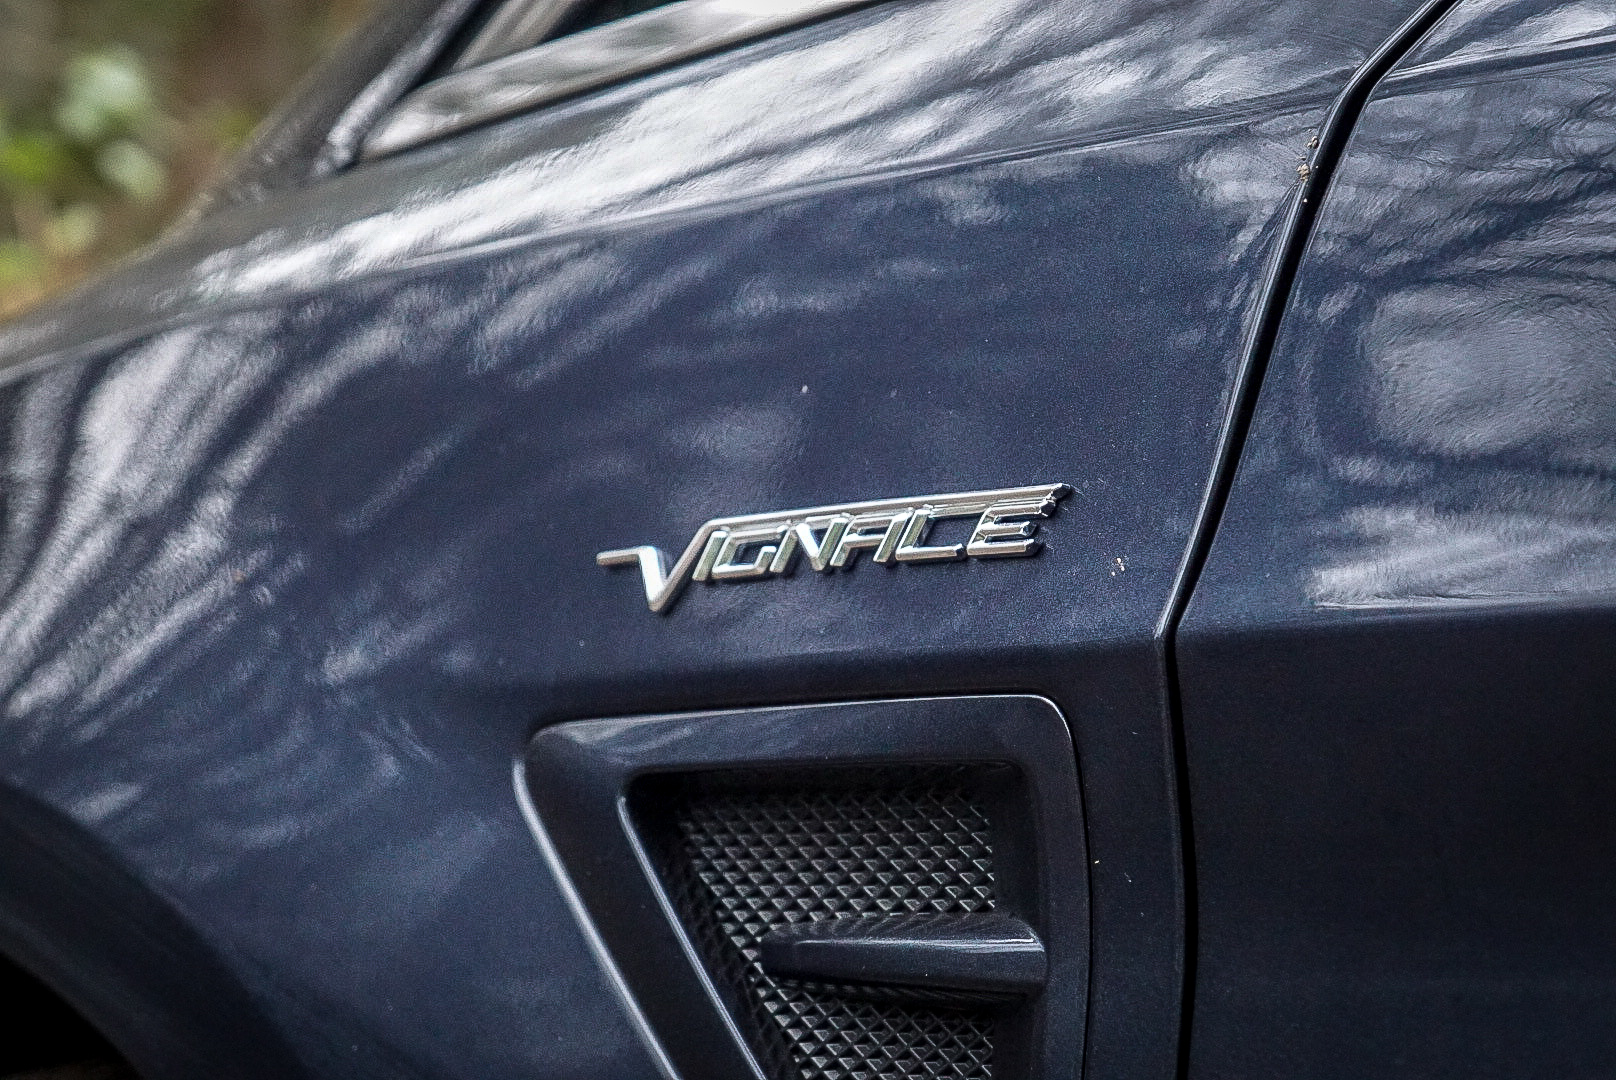 Vignale sits at the top of the range of specifications